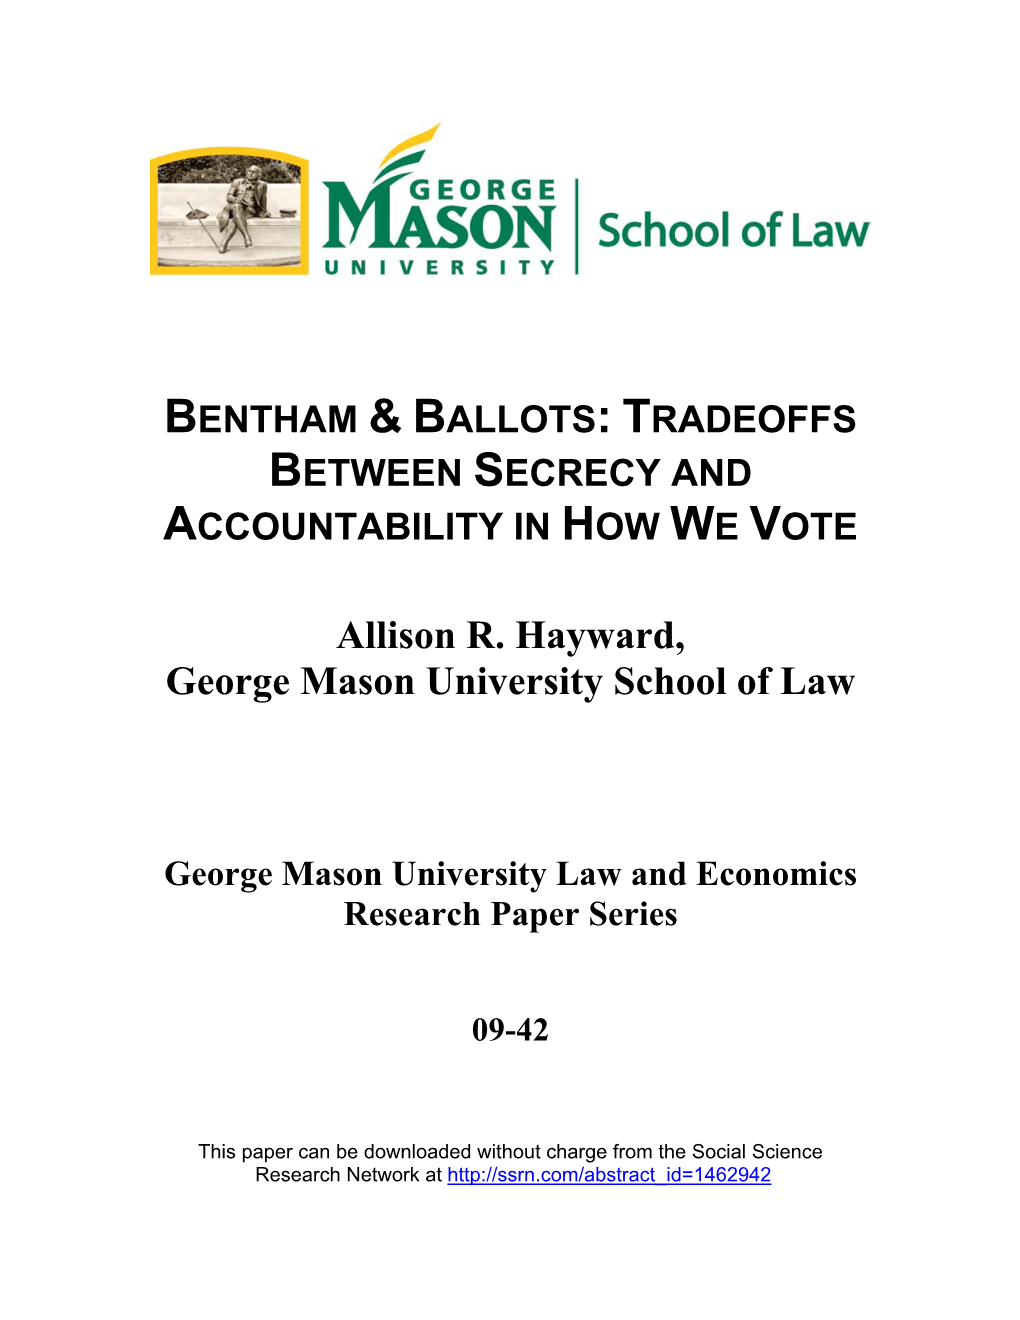 Bentham & Ballots: Tradeoffs Between Secrecy and Accountability in How We Vote